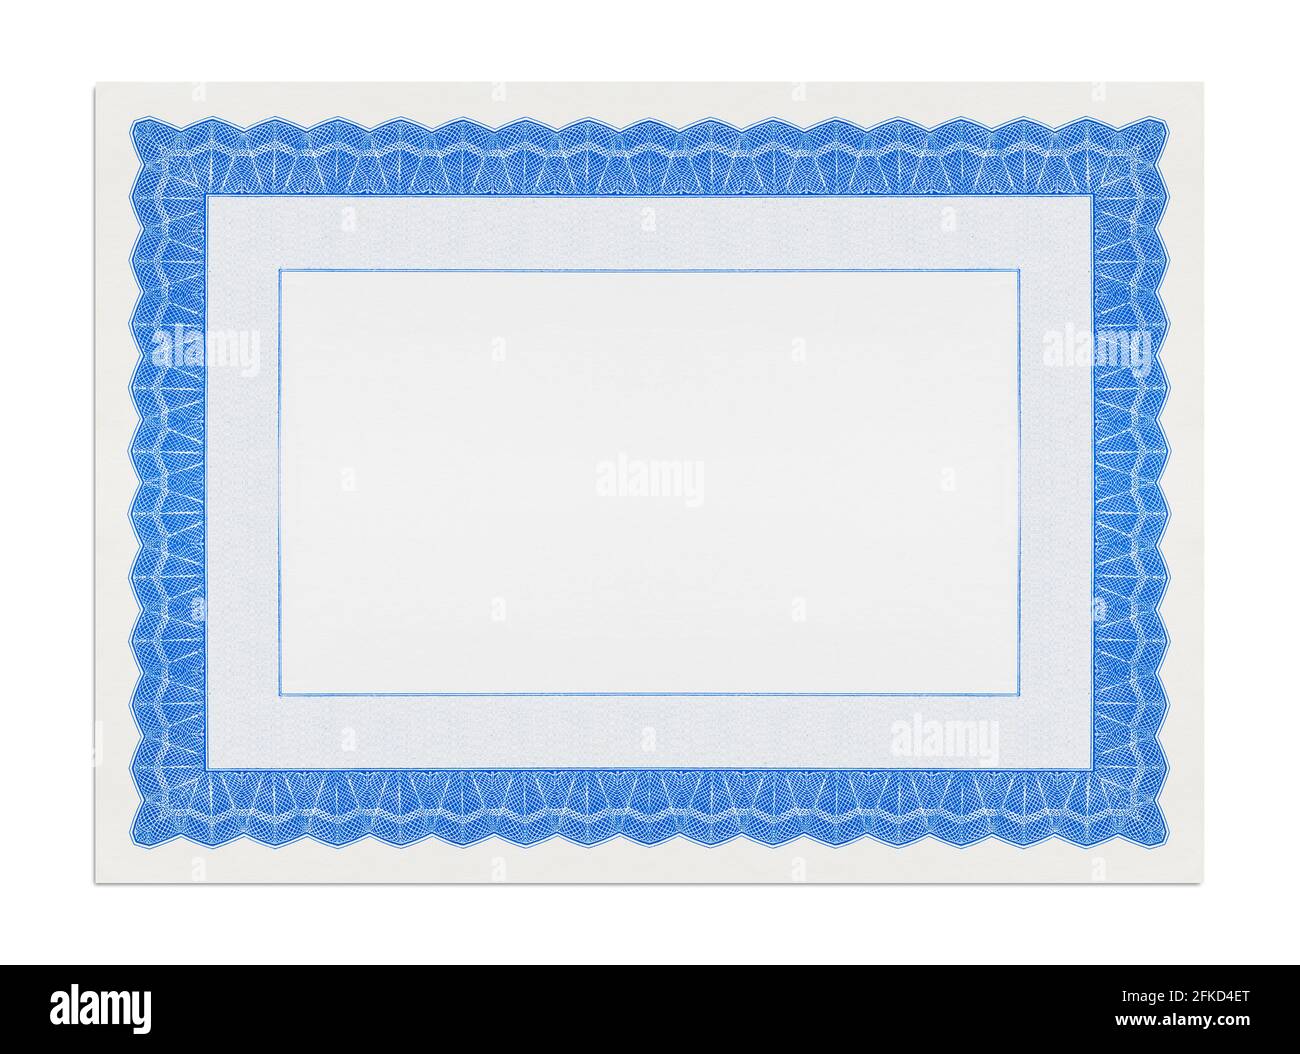 Blank Ornate Certificate Diploma Template Cut Out. Stock Photo